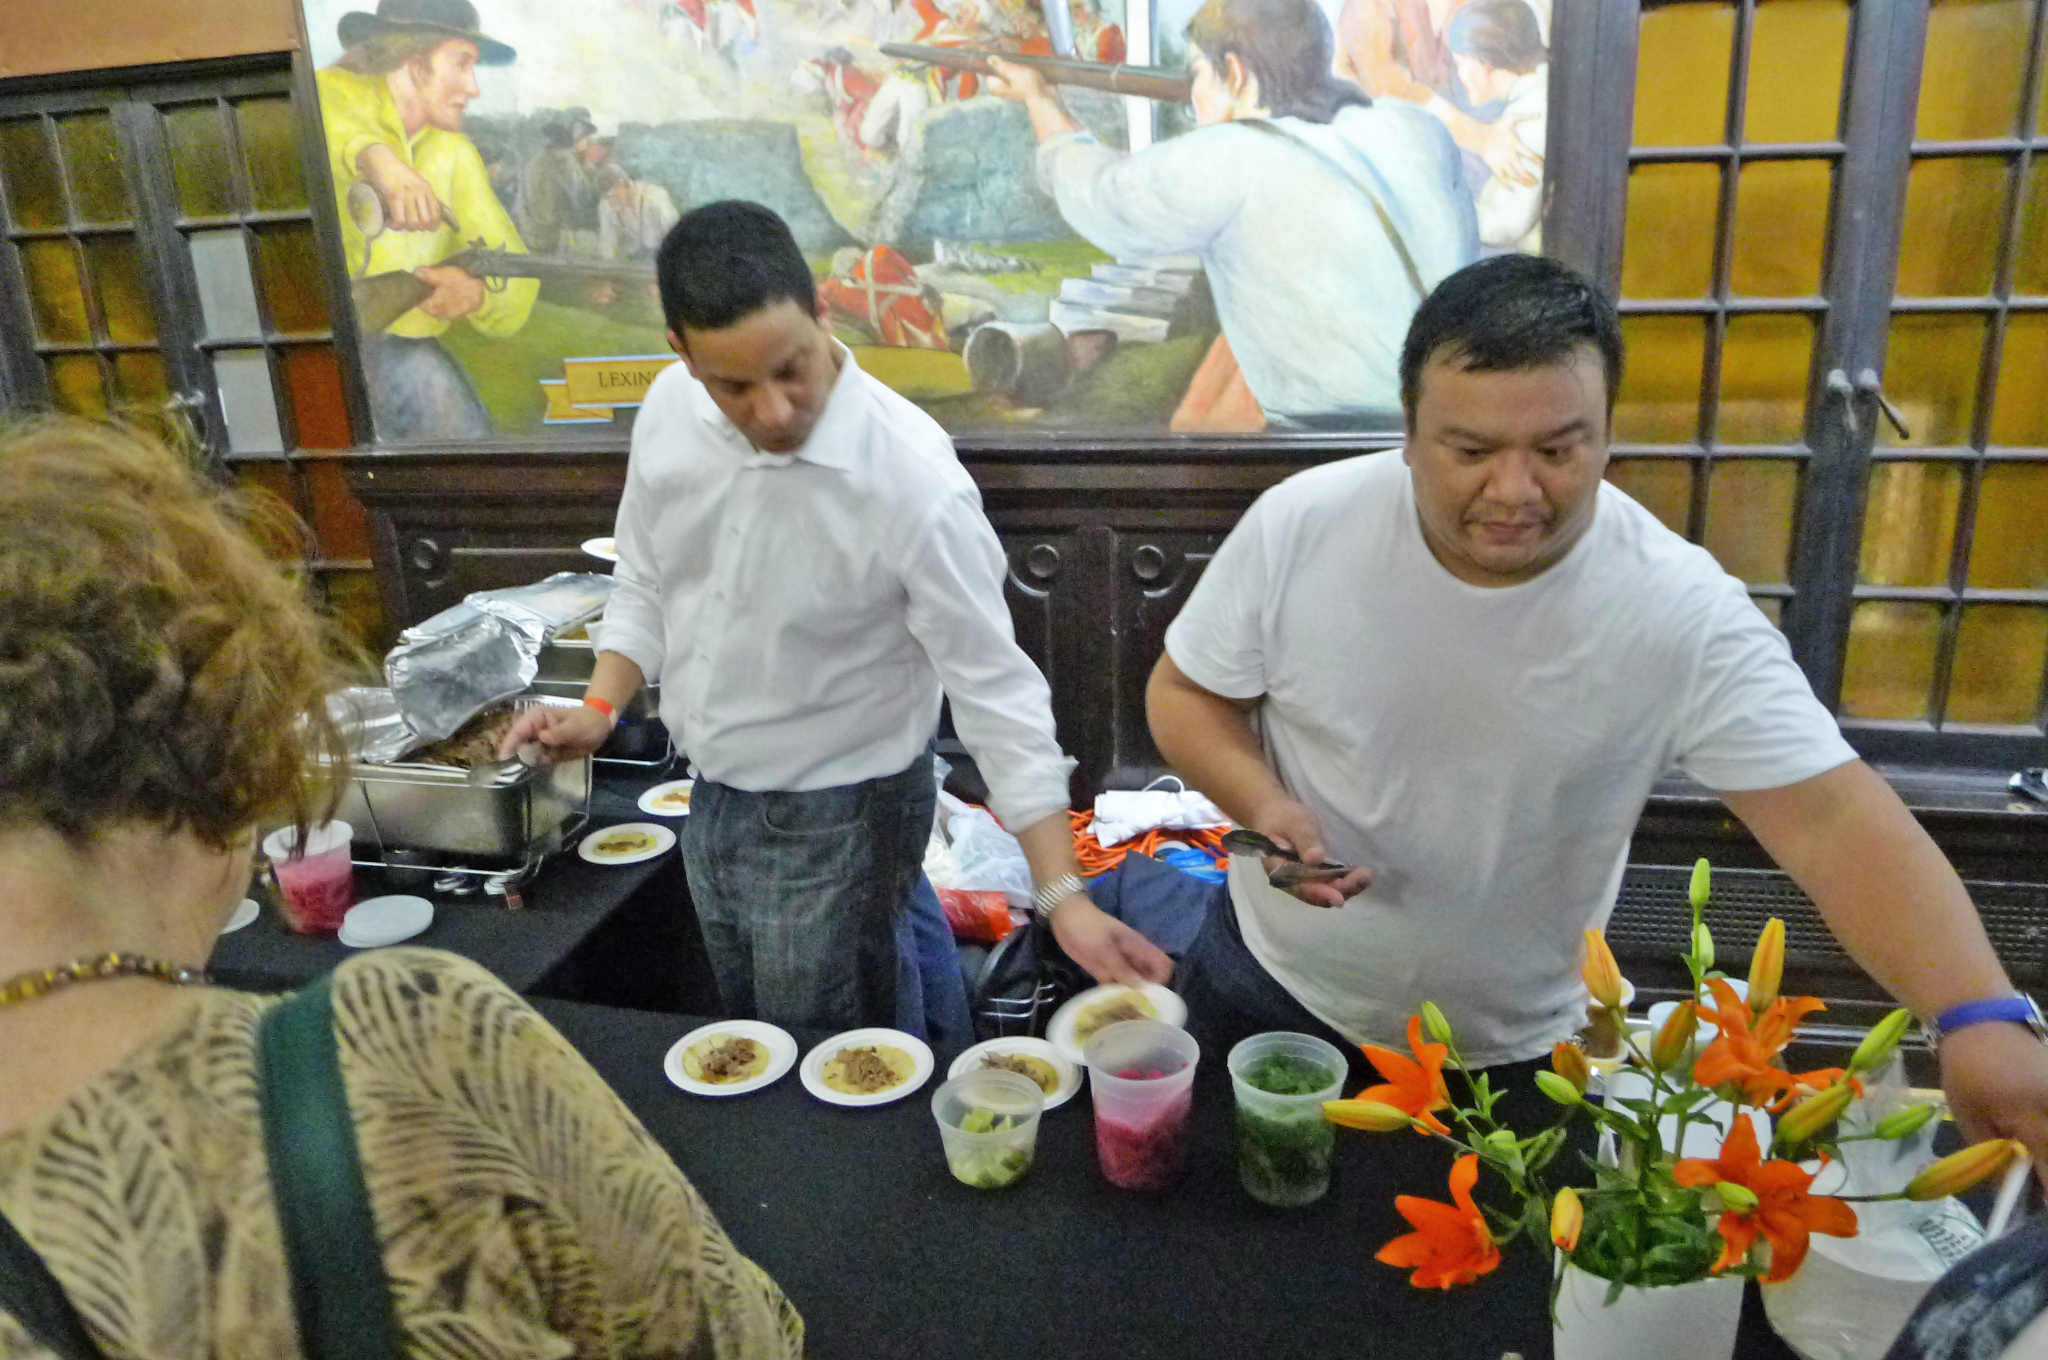 Two chefs work behind a table lined with small plates as they greet diners at a food festival.